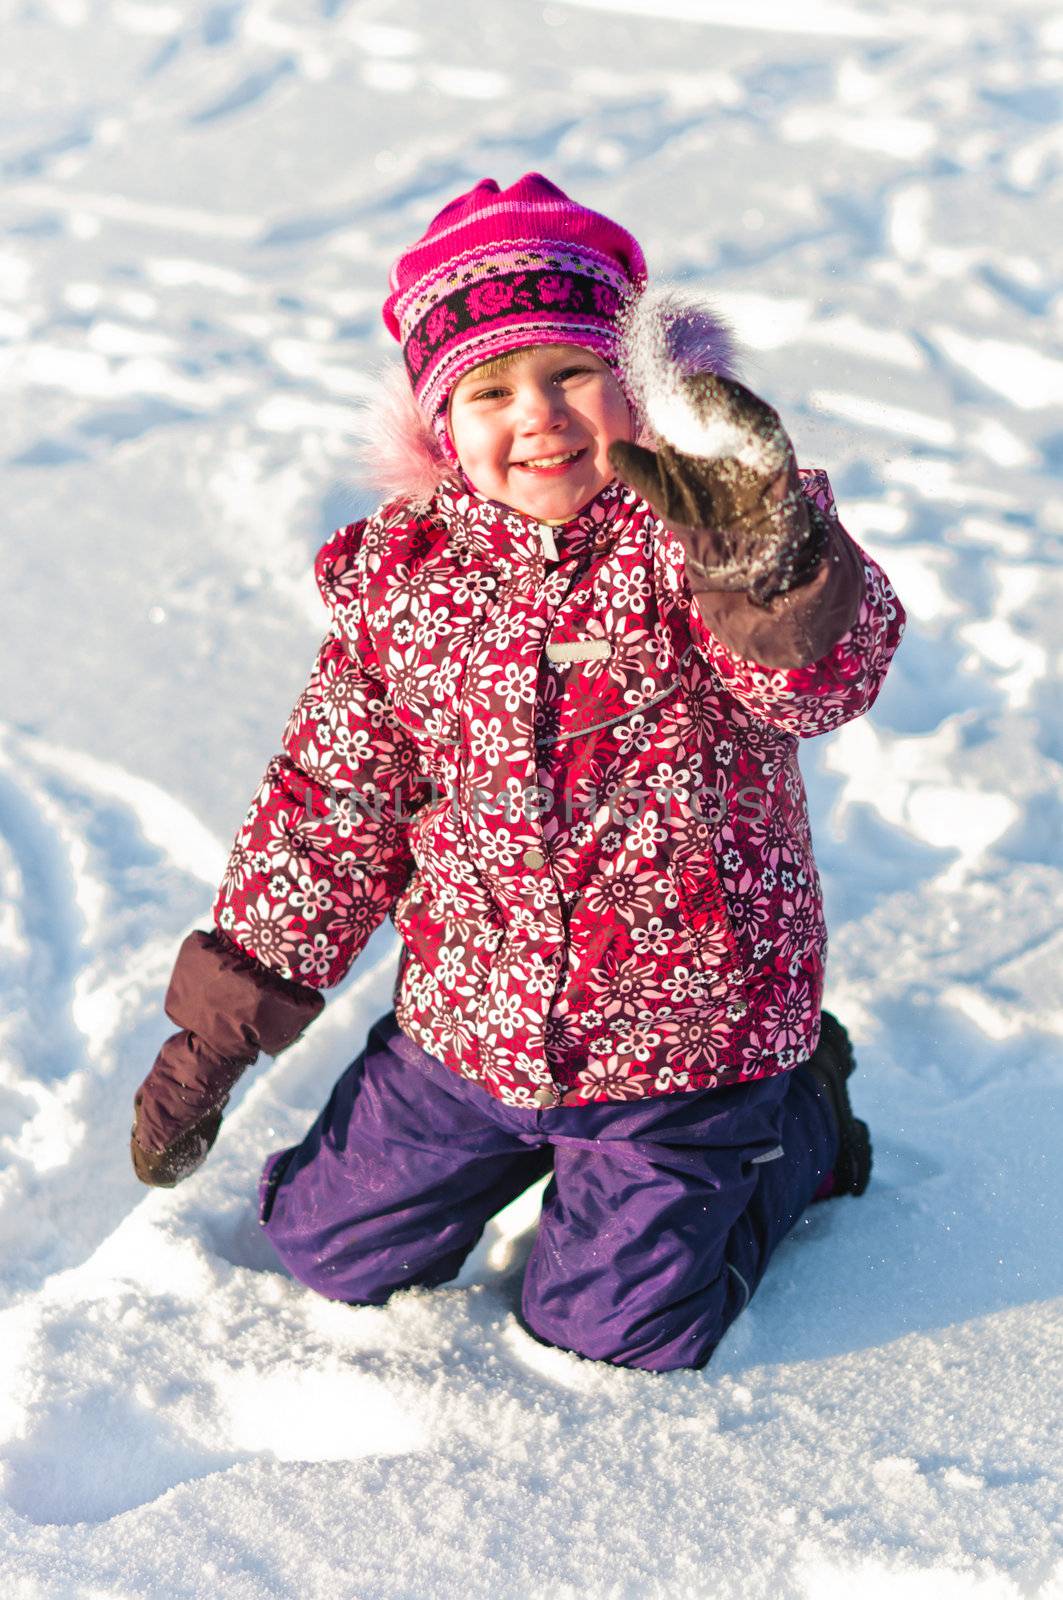 Baby sits on snow and smile by dmitryelagin